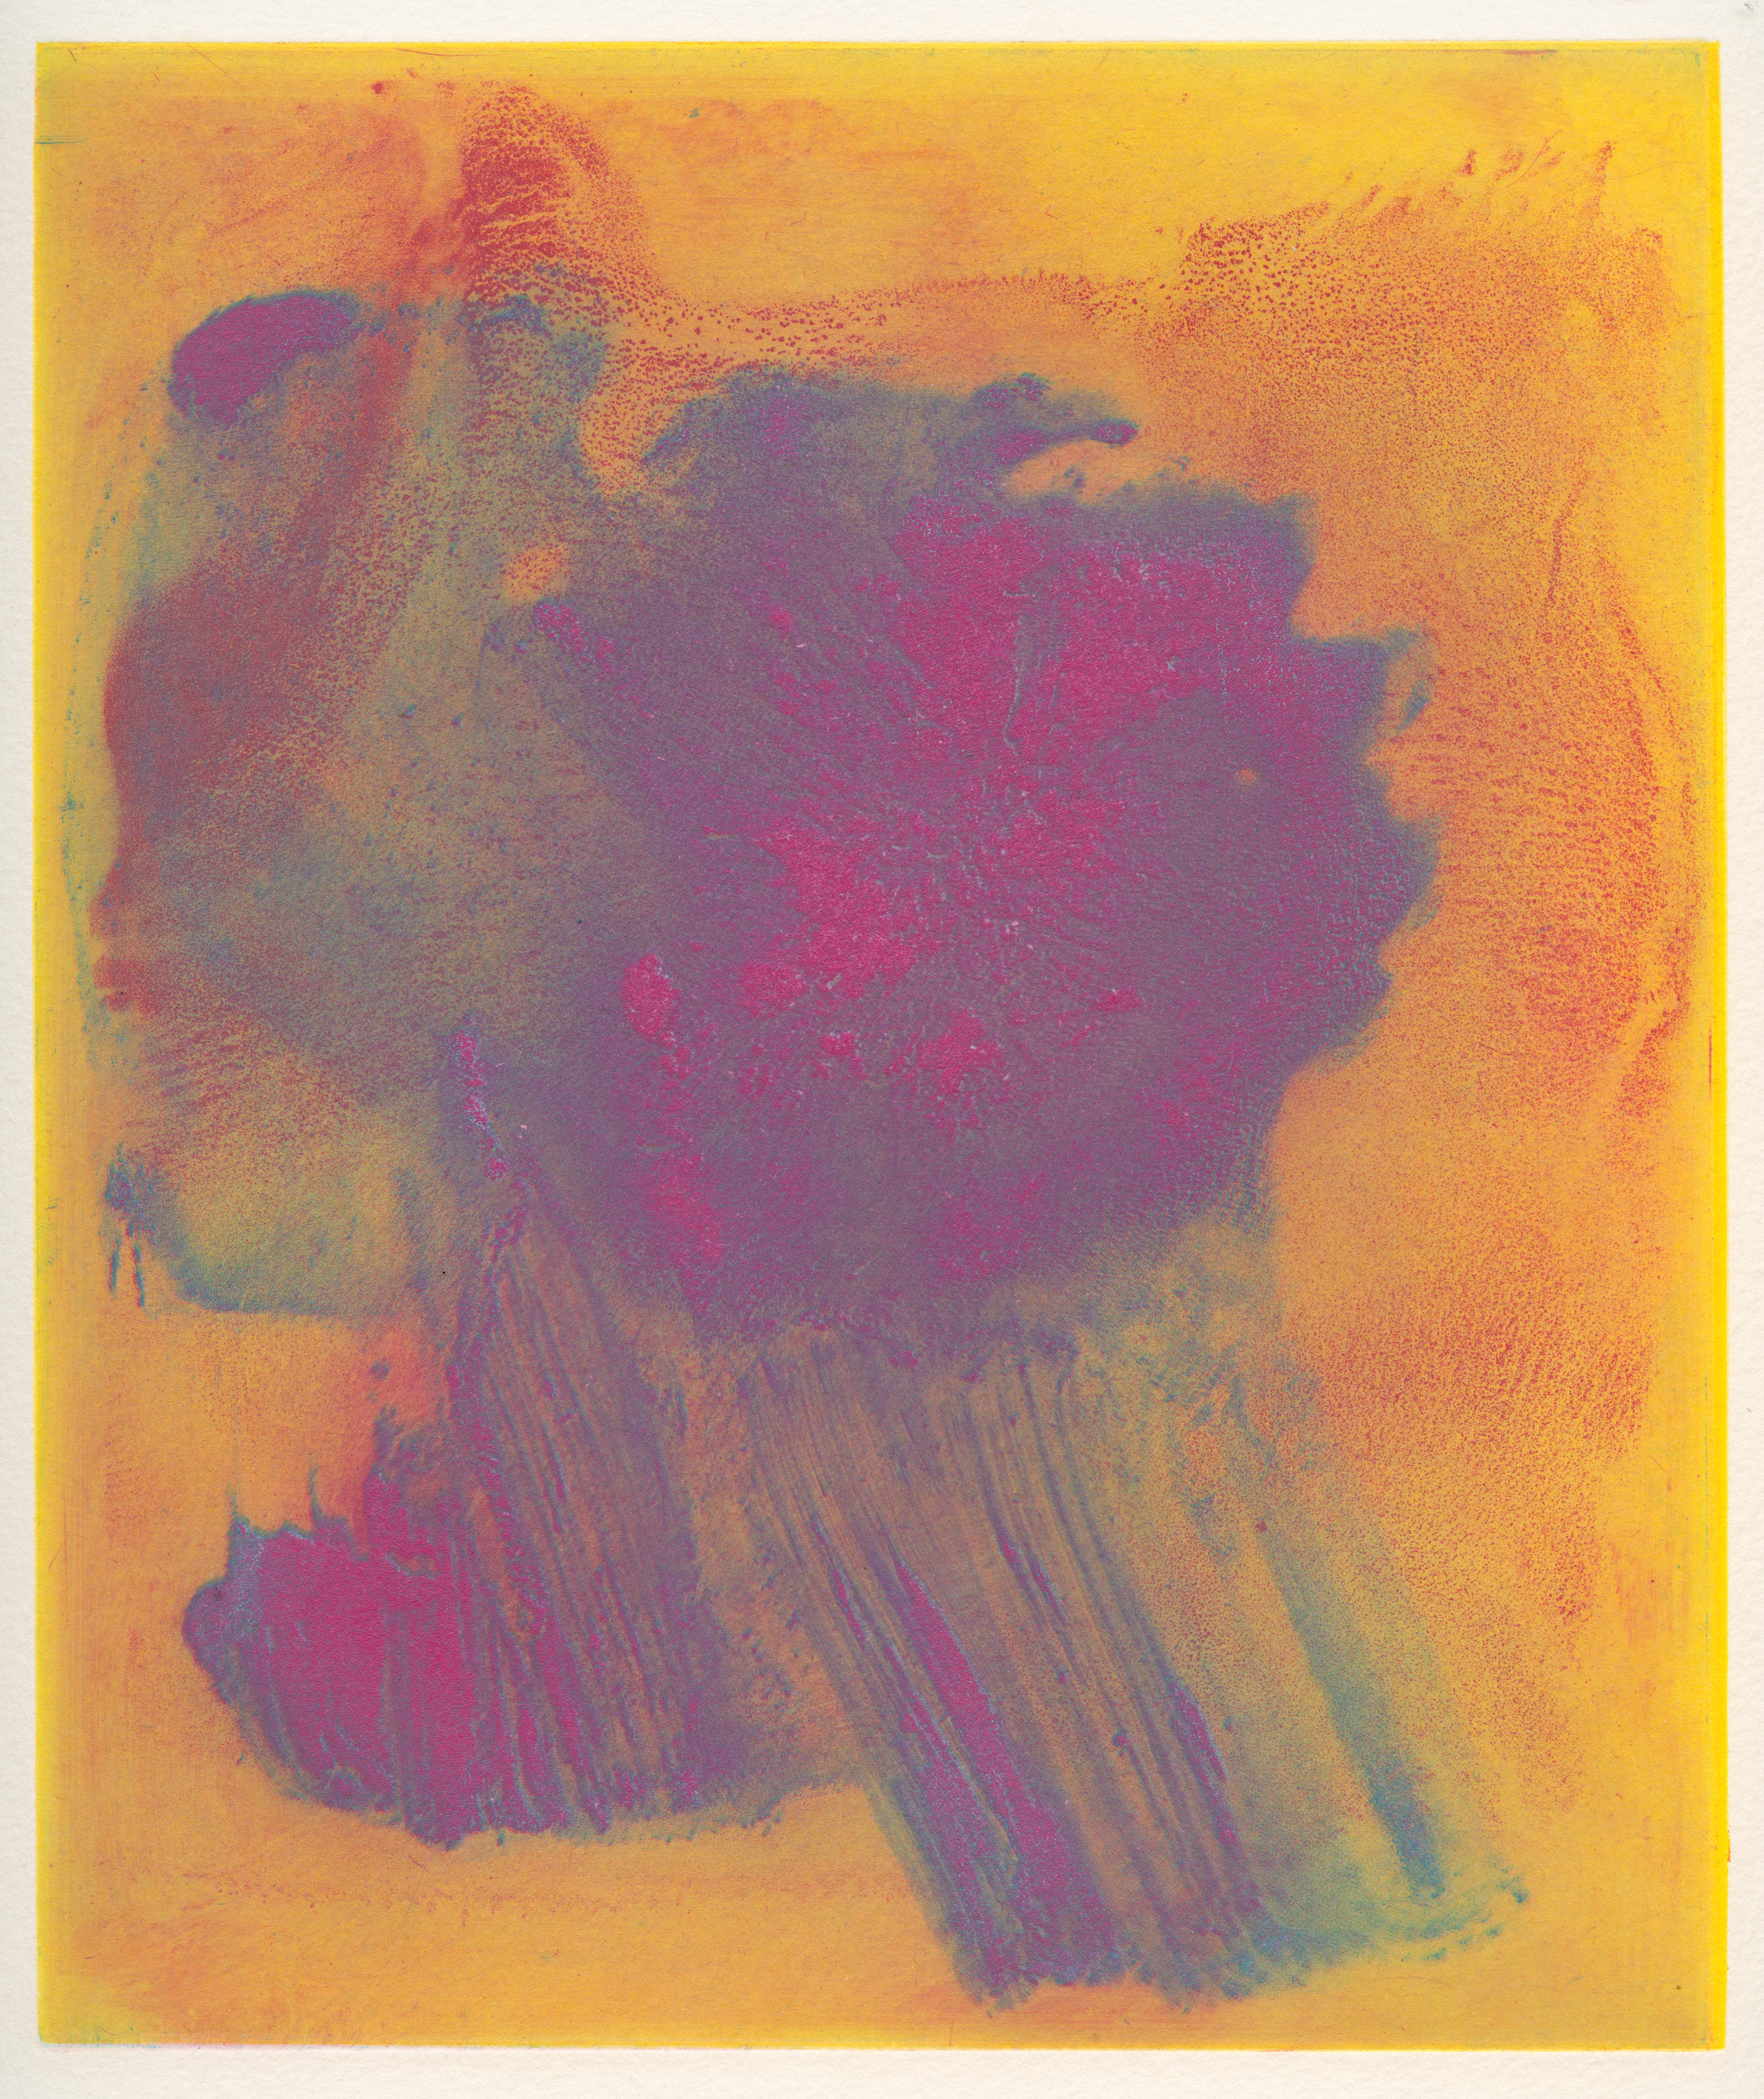 Monoprint on paper of magenta and blue brushstrokes centered over a yellow and yellow-orange background.